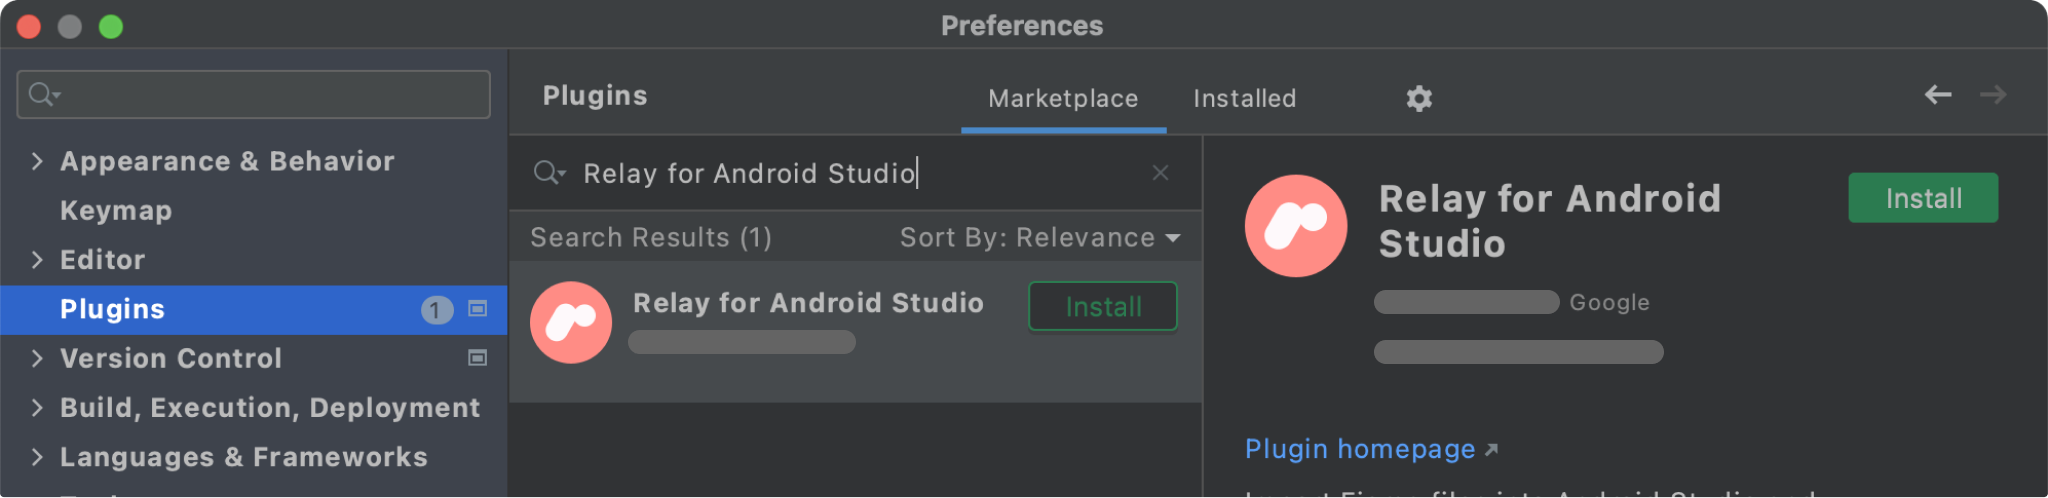 Relay for Android Studio in the marketplace